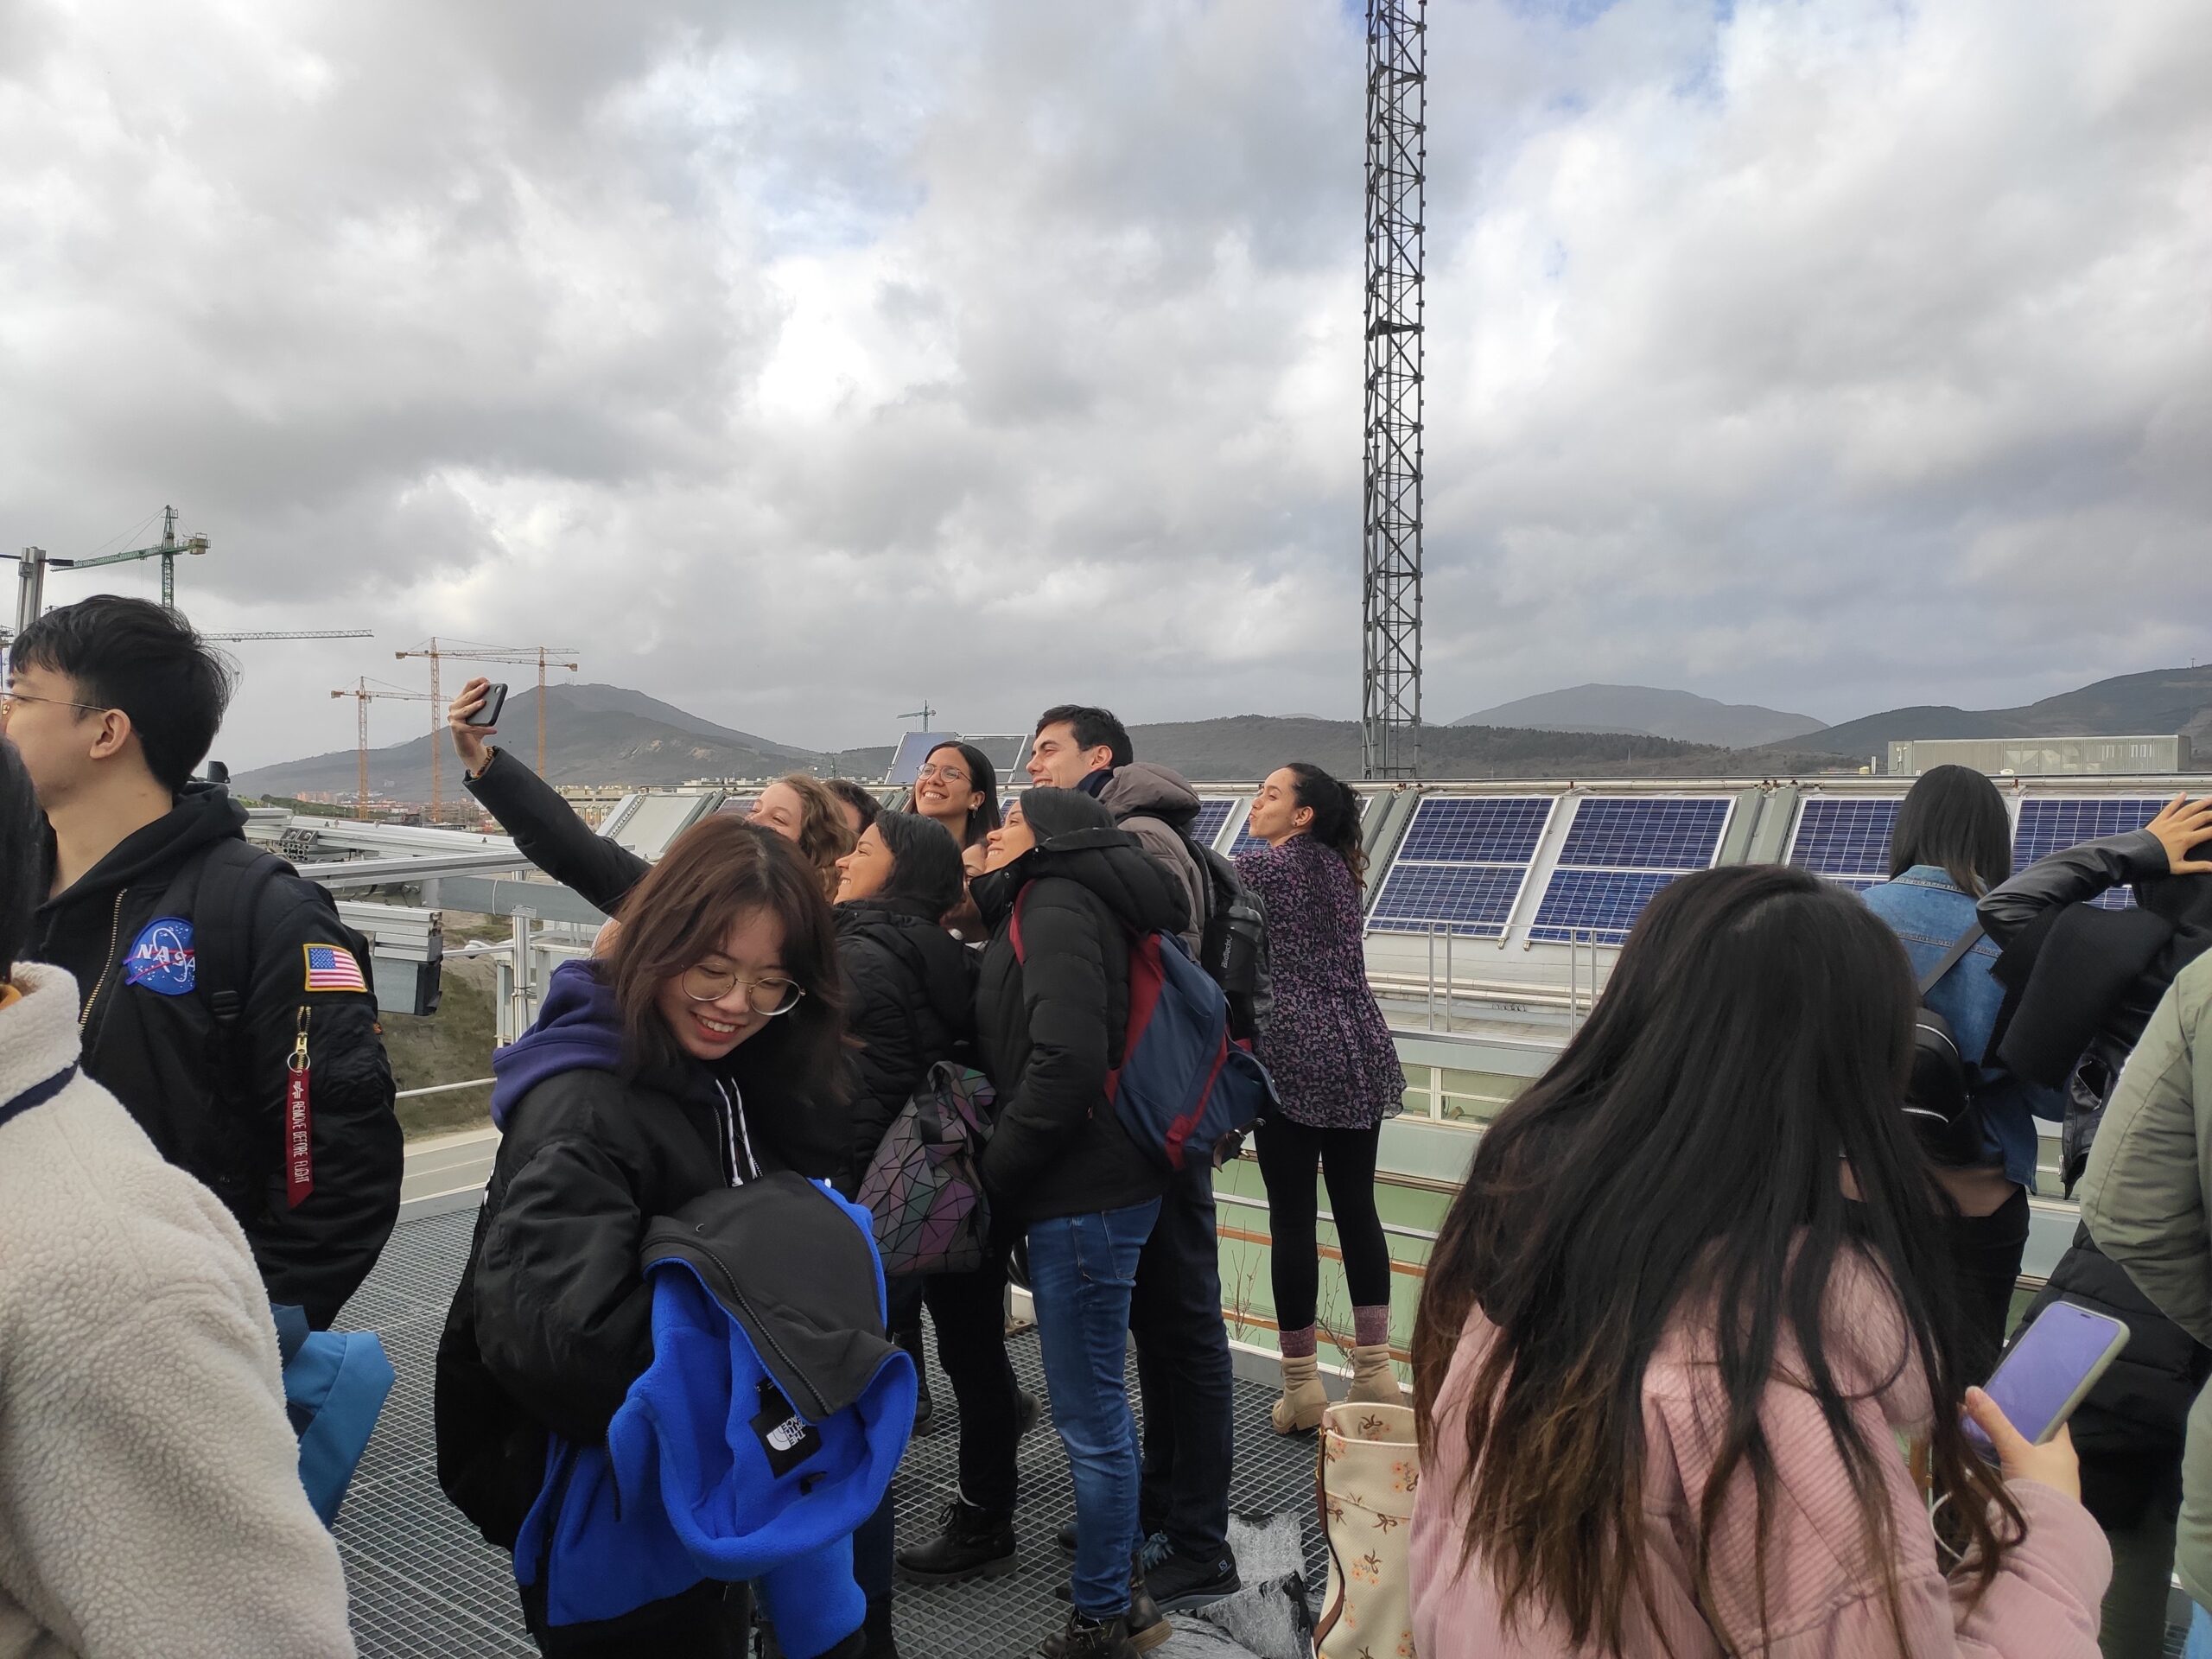 Student looking at PV technology at the roof of the Cener National Renewable Energy Centre building